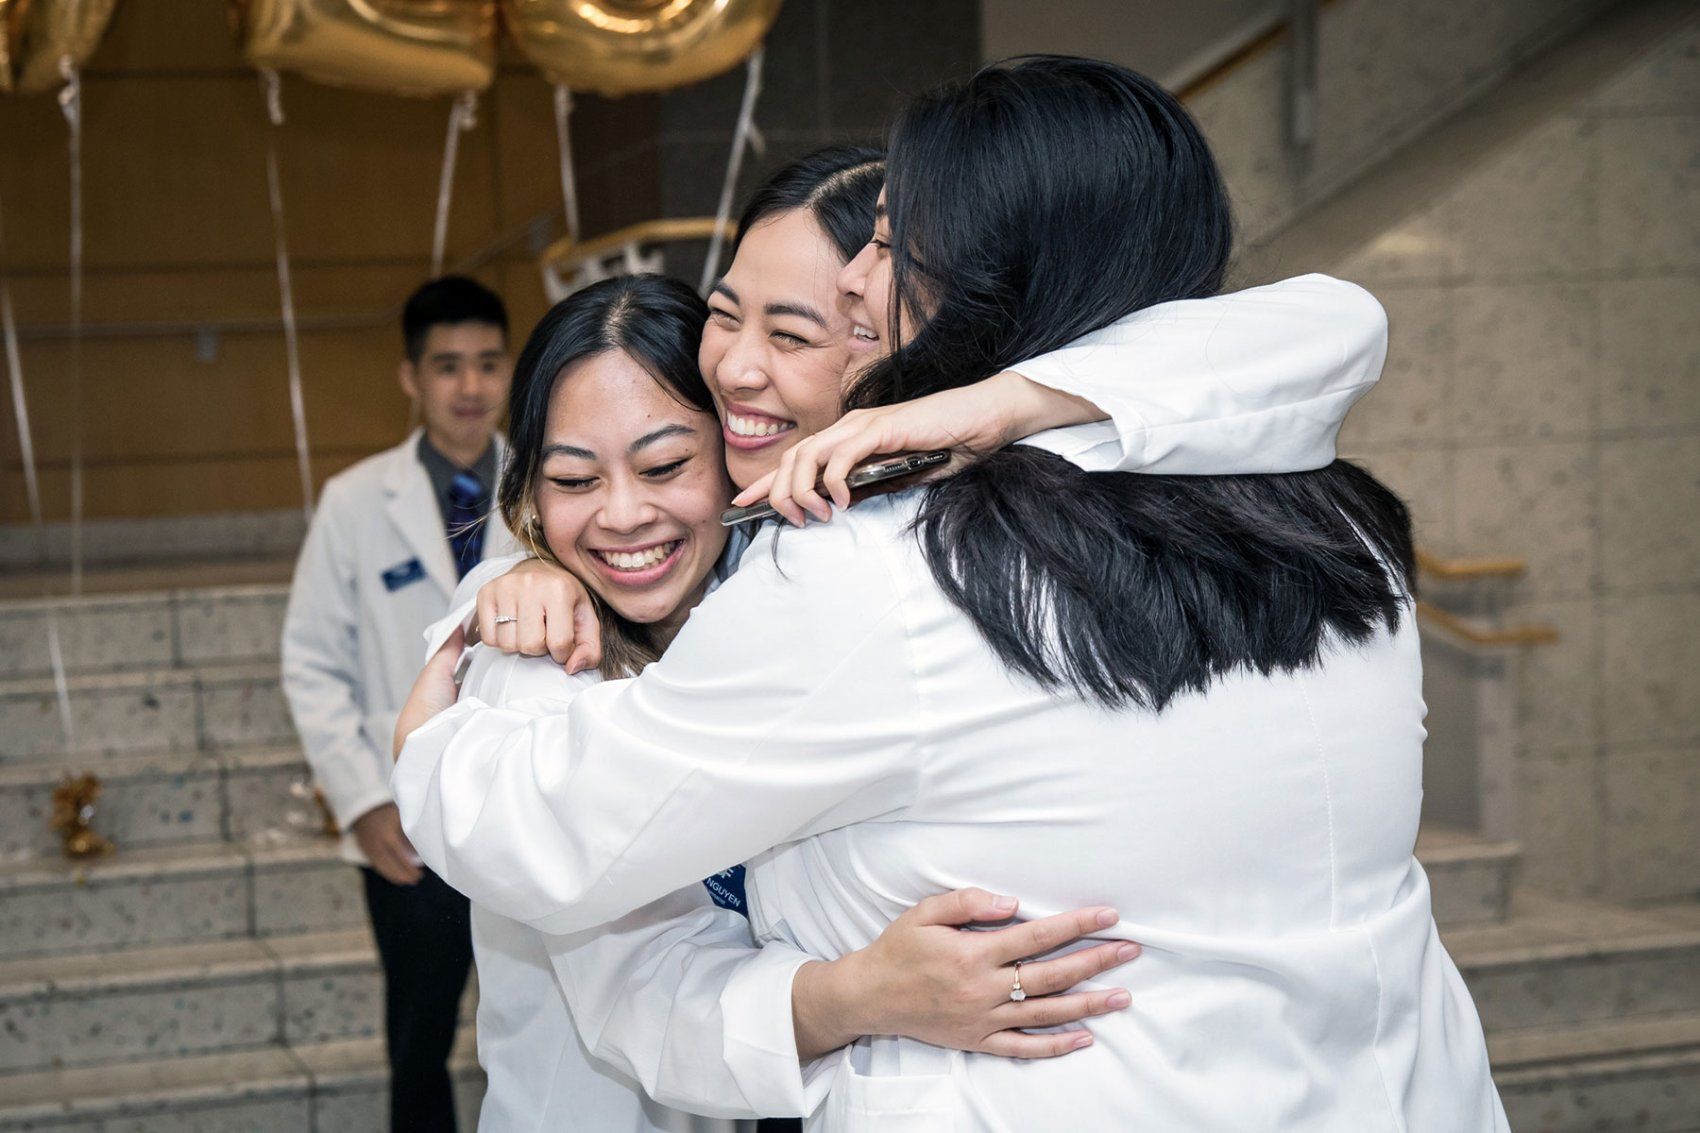 Three new pharmacy students in a white goat gather in a group hug